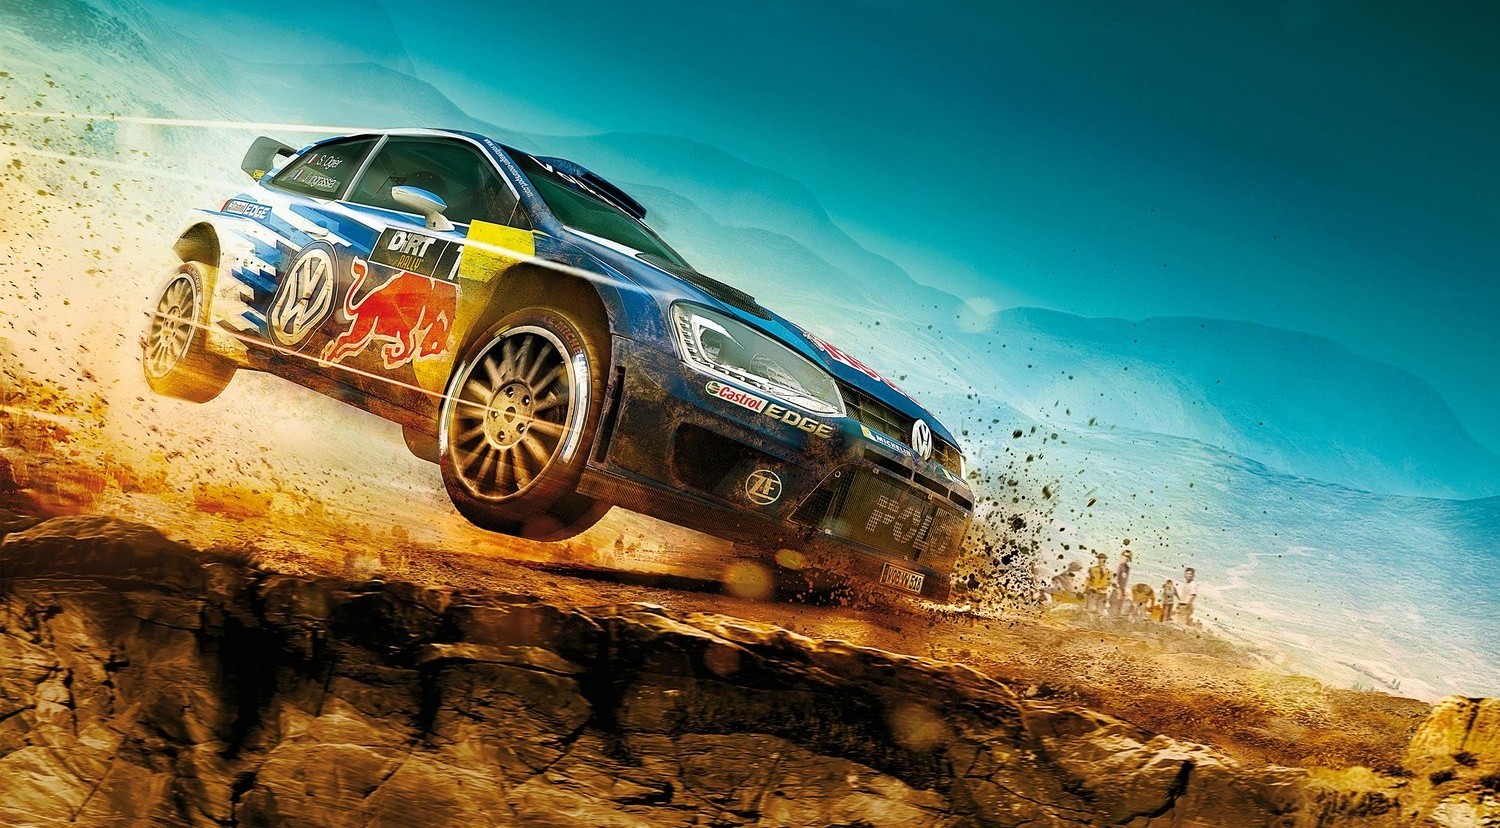 volkswagen-s-world-rally-car-depicted-in-the-forthcoming-dirt-rally-video-game